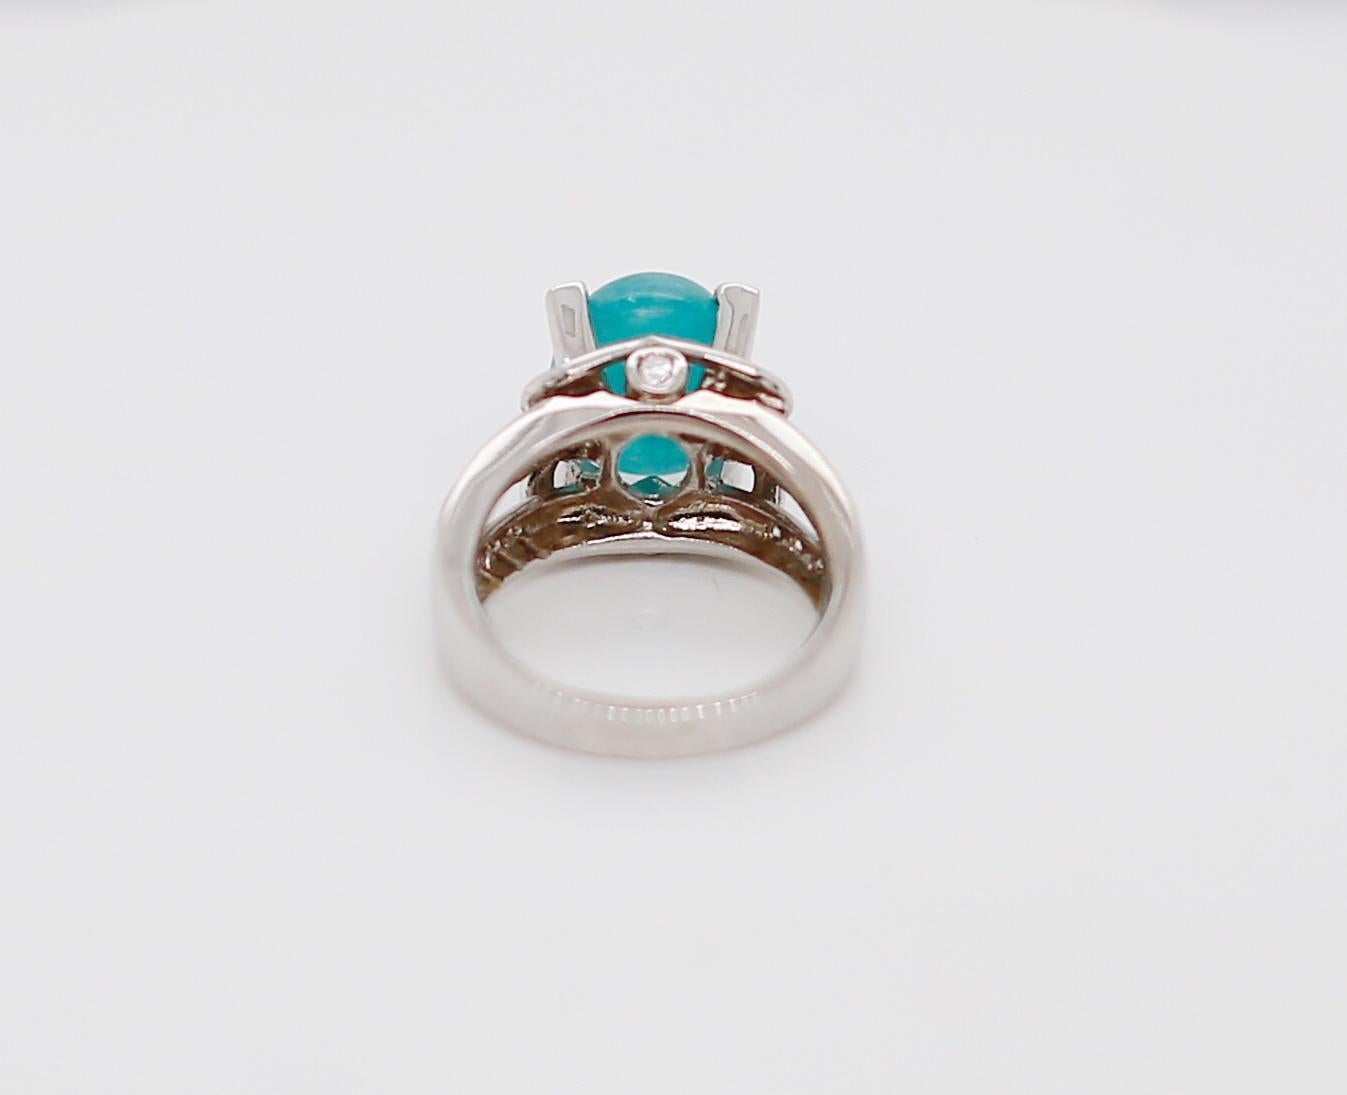 18 Karat White Gold Paraiba Tourmaline and Diamond Ring 
Paraiba Tourmaline Weight: 6.25ct 
Diamond Weight: 0.66twt 
Total Weight: 11.4g
Size: 6.5 (sizable) 
We offer Appraisals by The National Association of Jewelry Appraisals.
We guarantee all